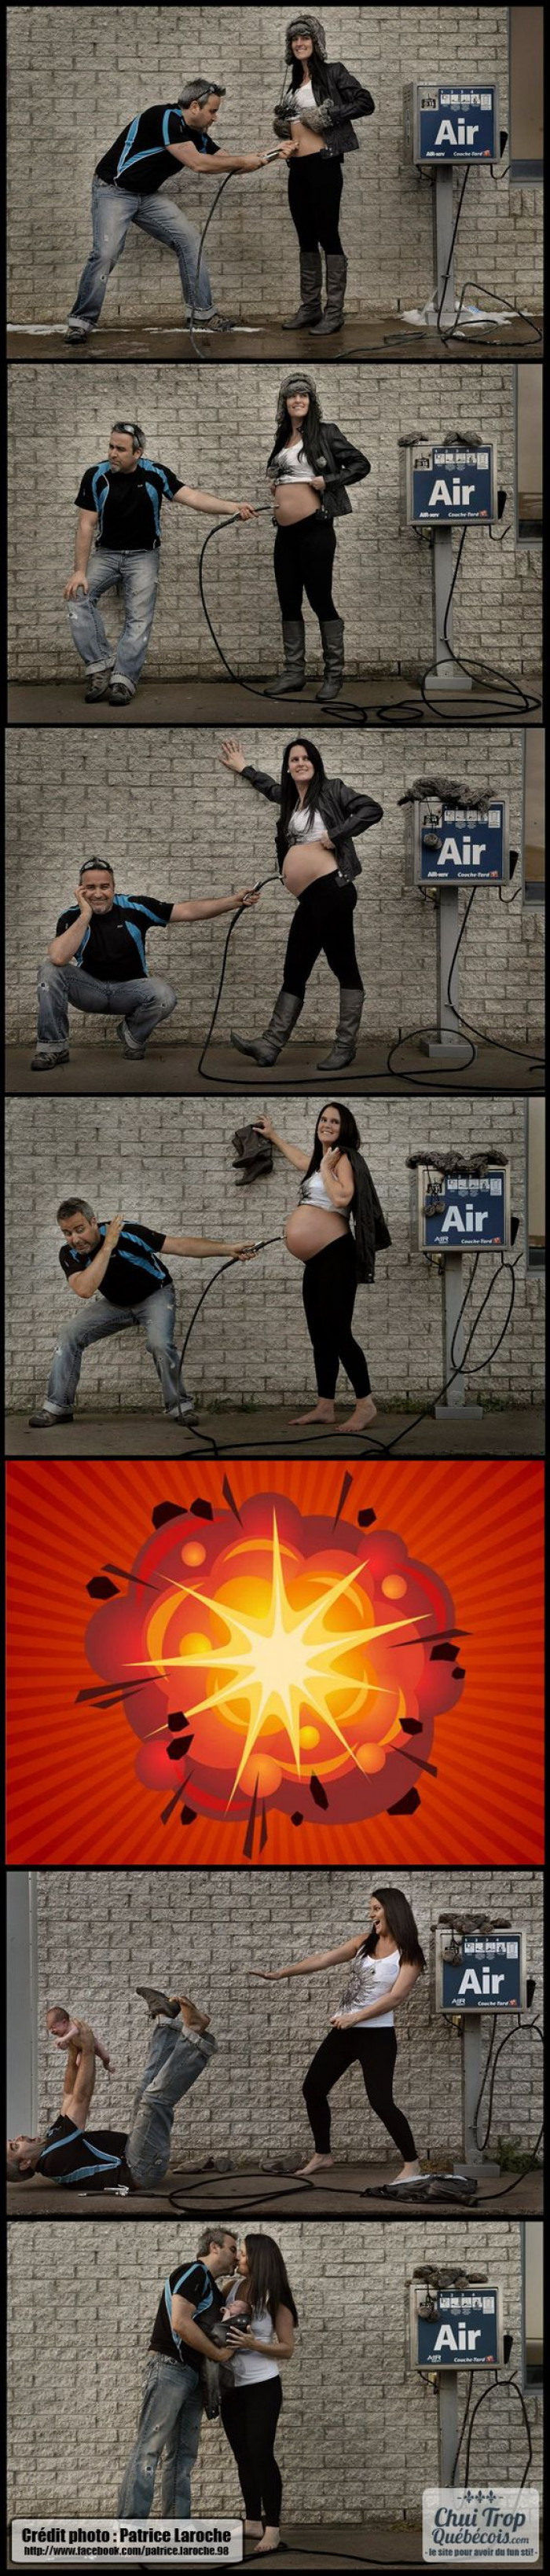 Pregnancy Announcement Done Right